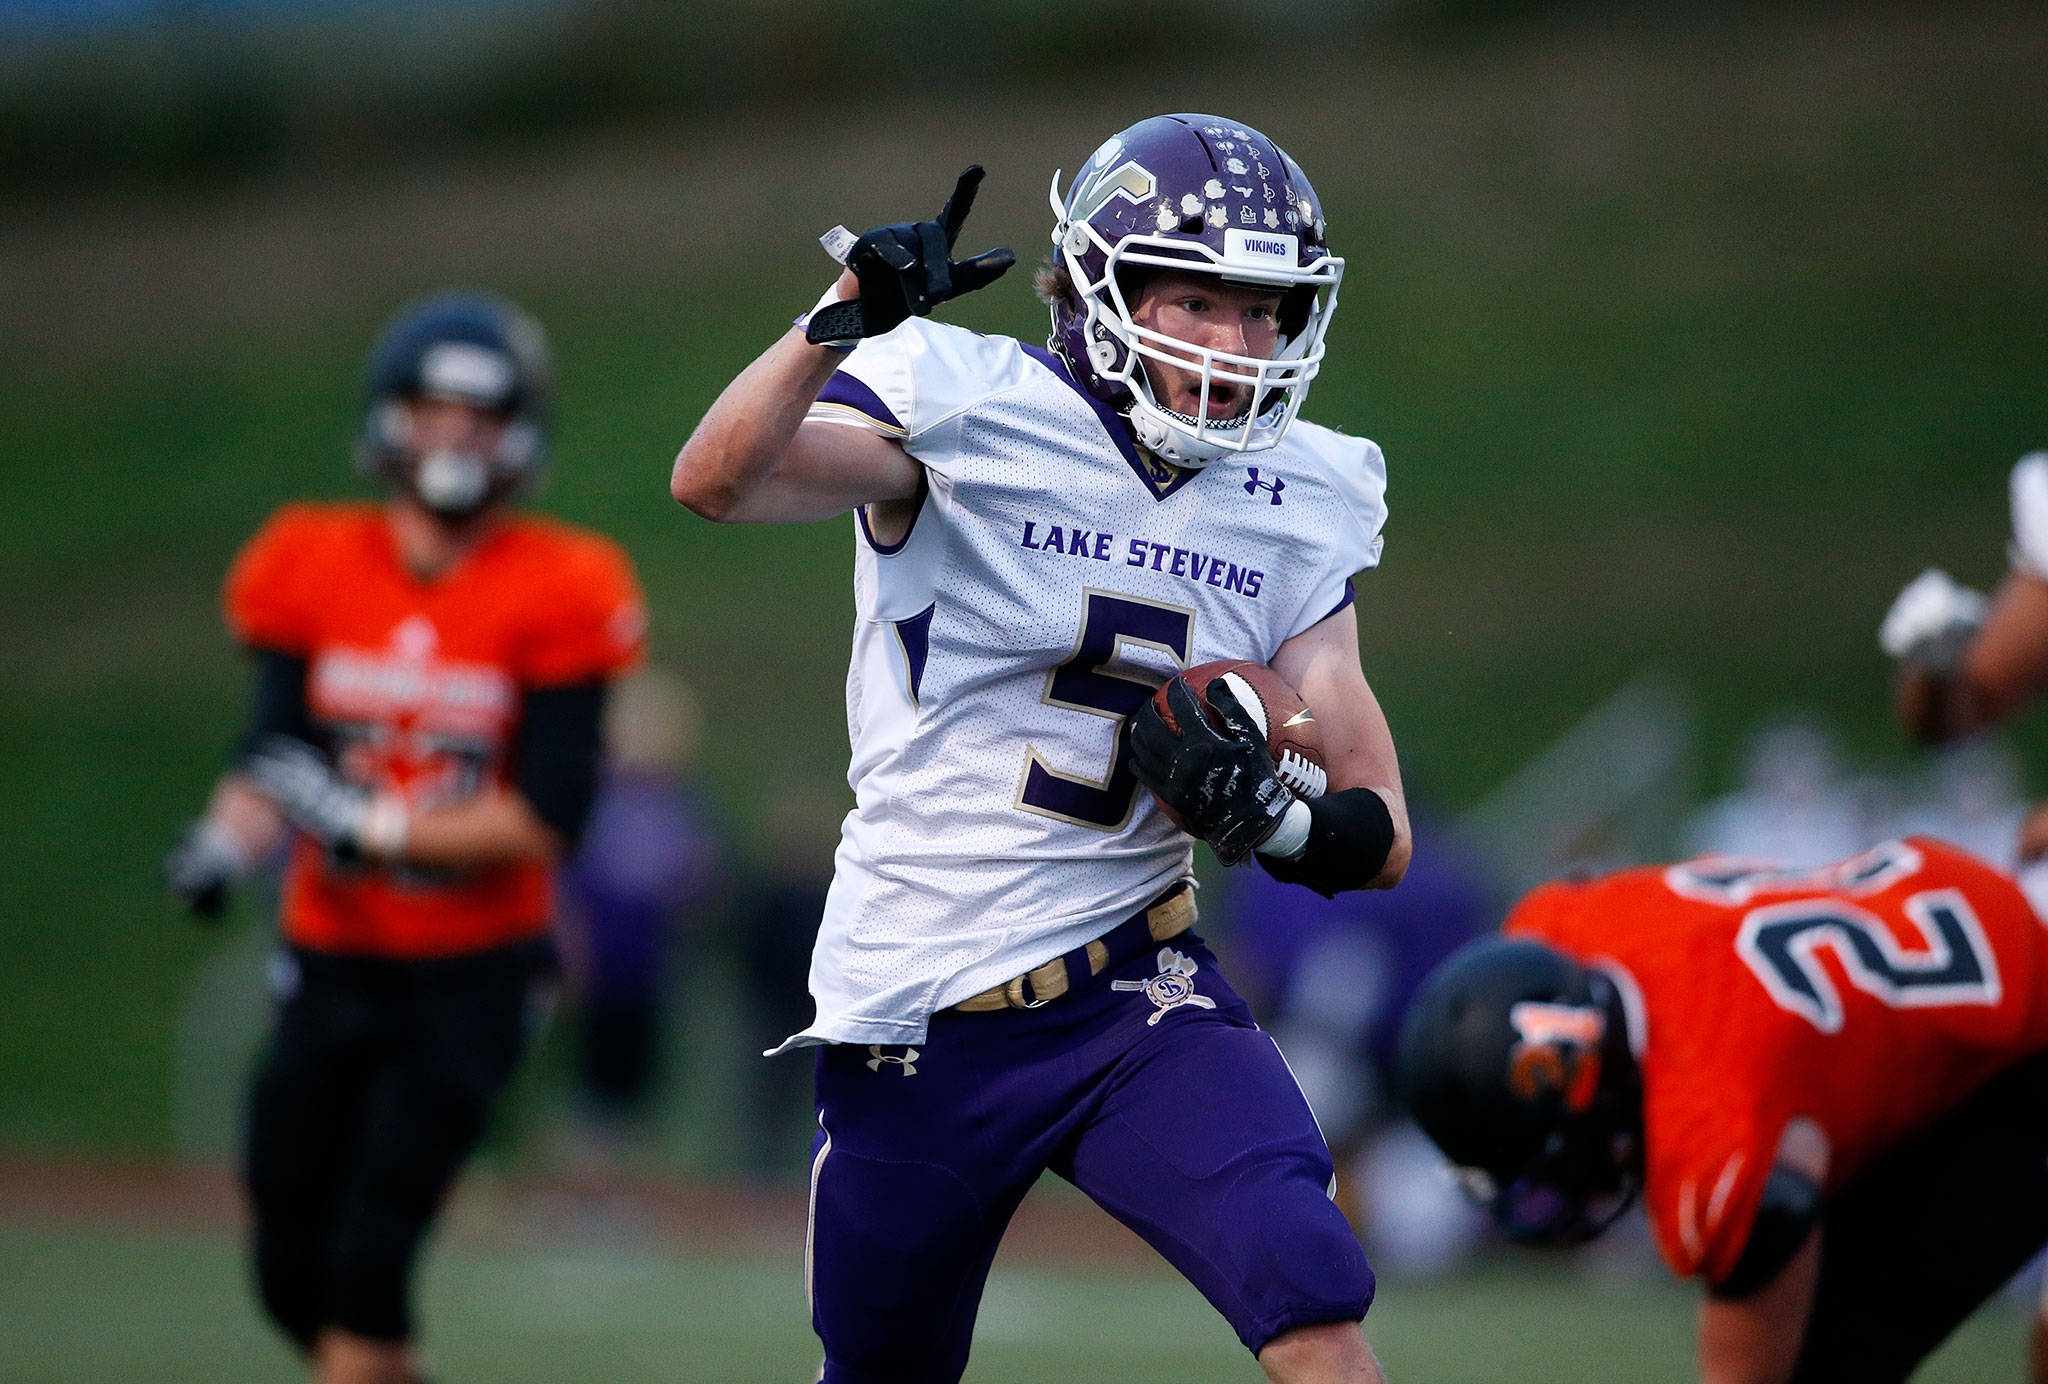 Lake Stevens’ Ian Hanson raises a finger while running for a touchdown in Lake Stevens’ 49-31 victory over Monroe on Friday night. (Andy Bronson / The Herald)